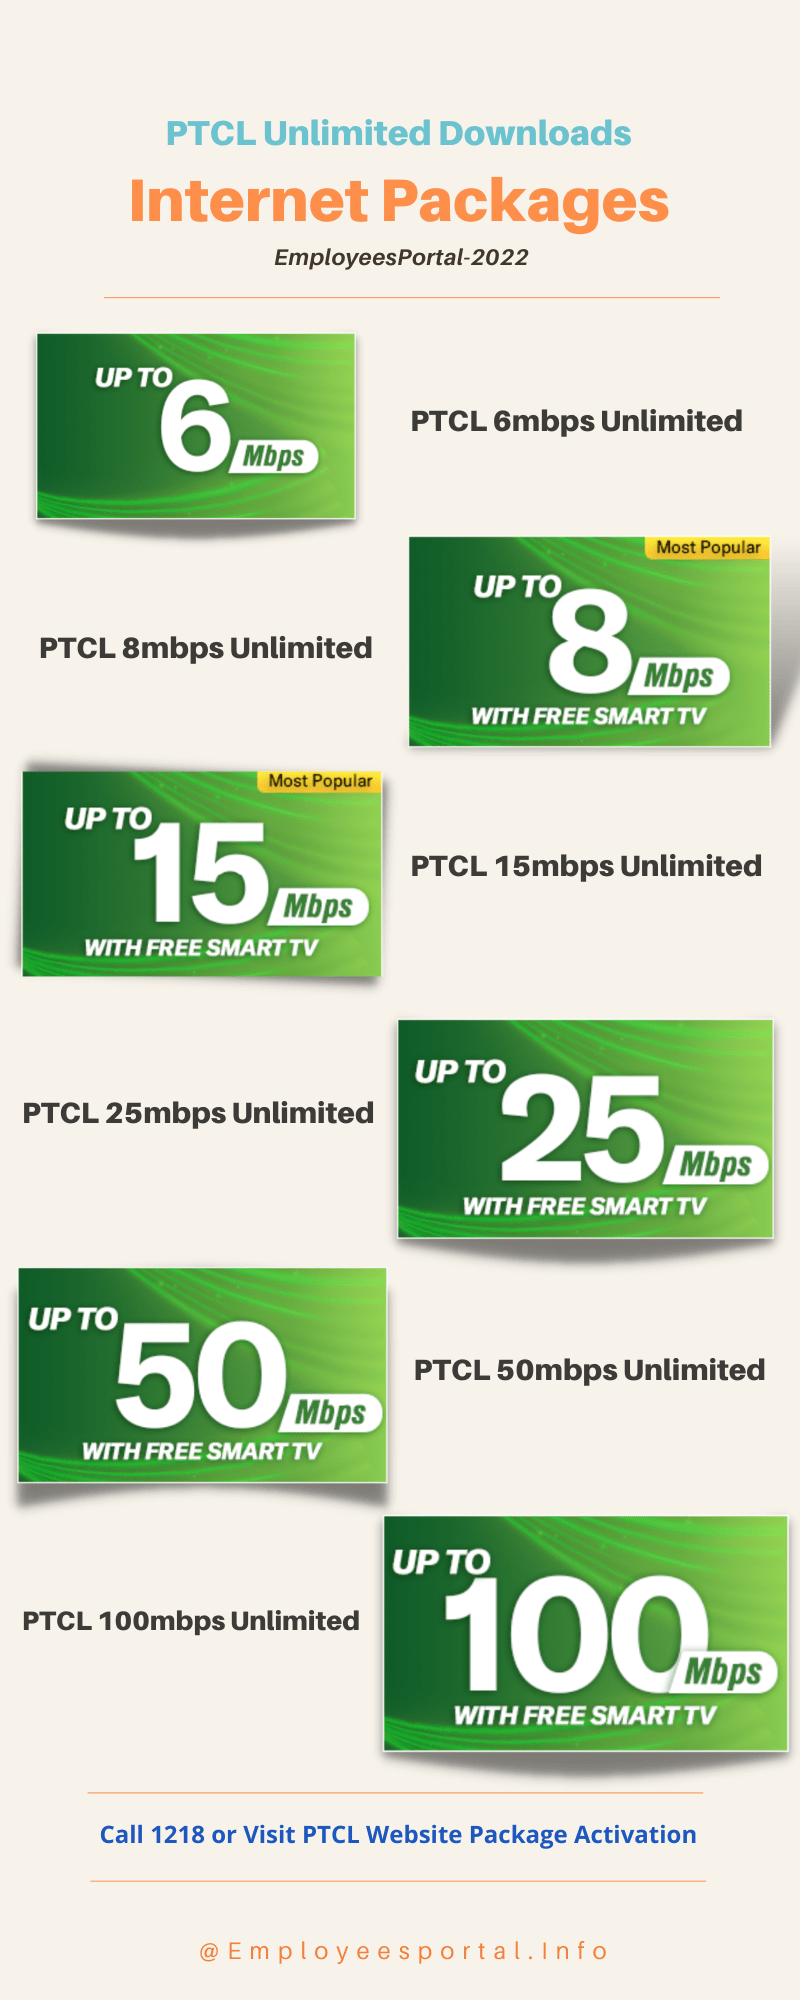 PTCL Internet Packages 2022 Unlimited Downloads (Infographics)